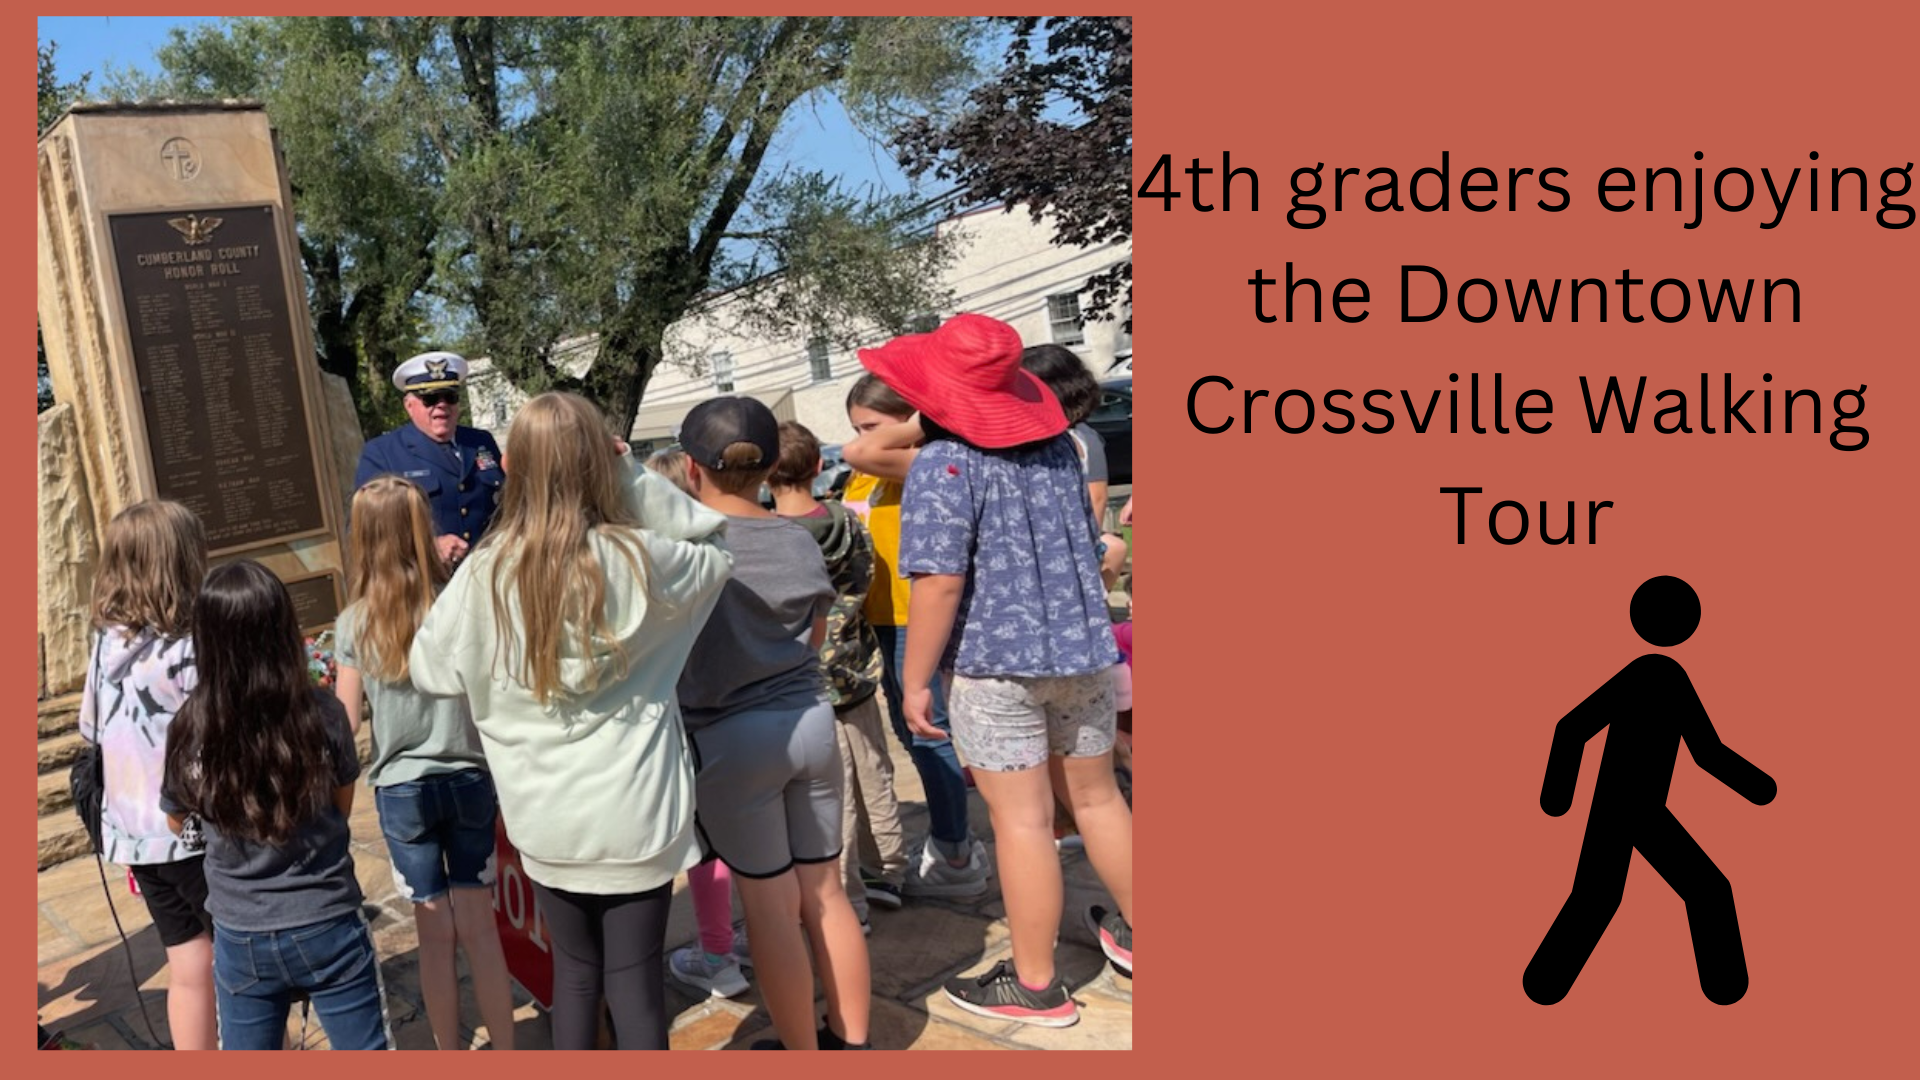 4th graders on walking tour of Downtown Crossville